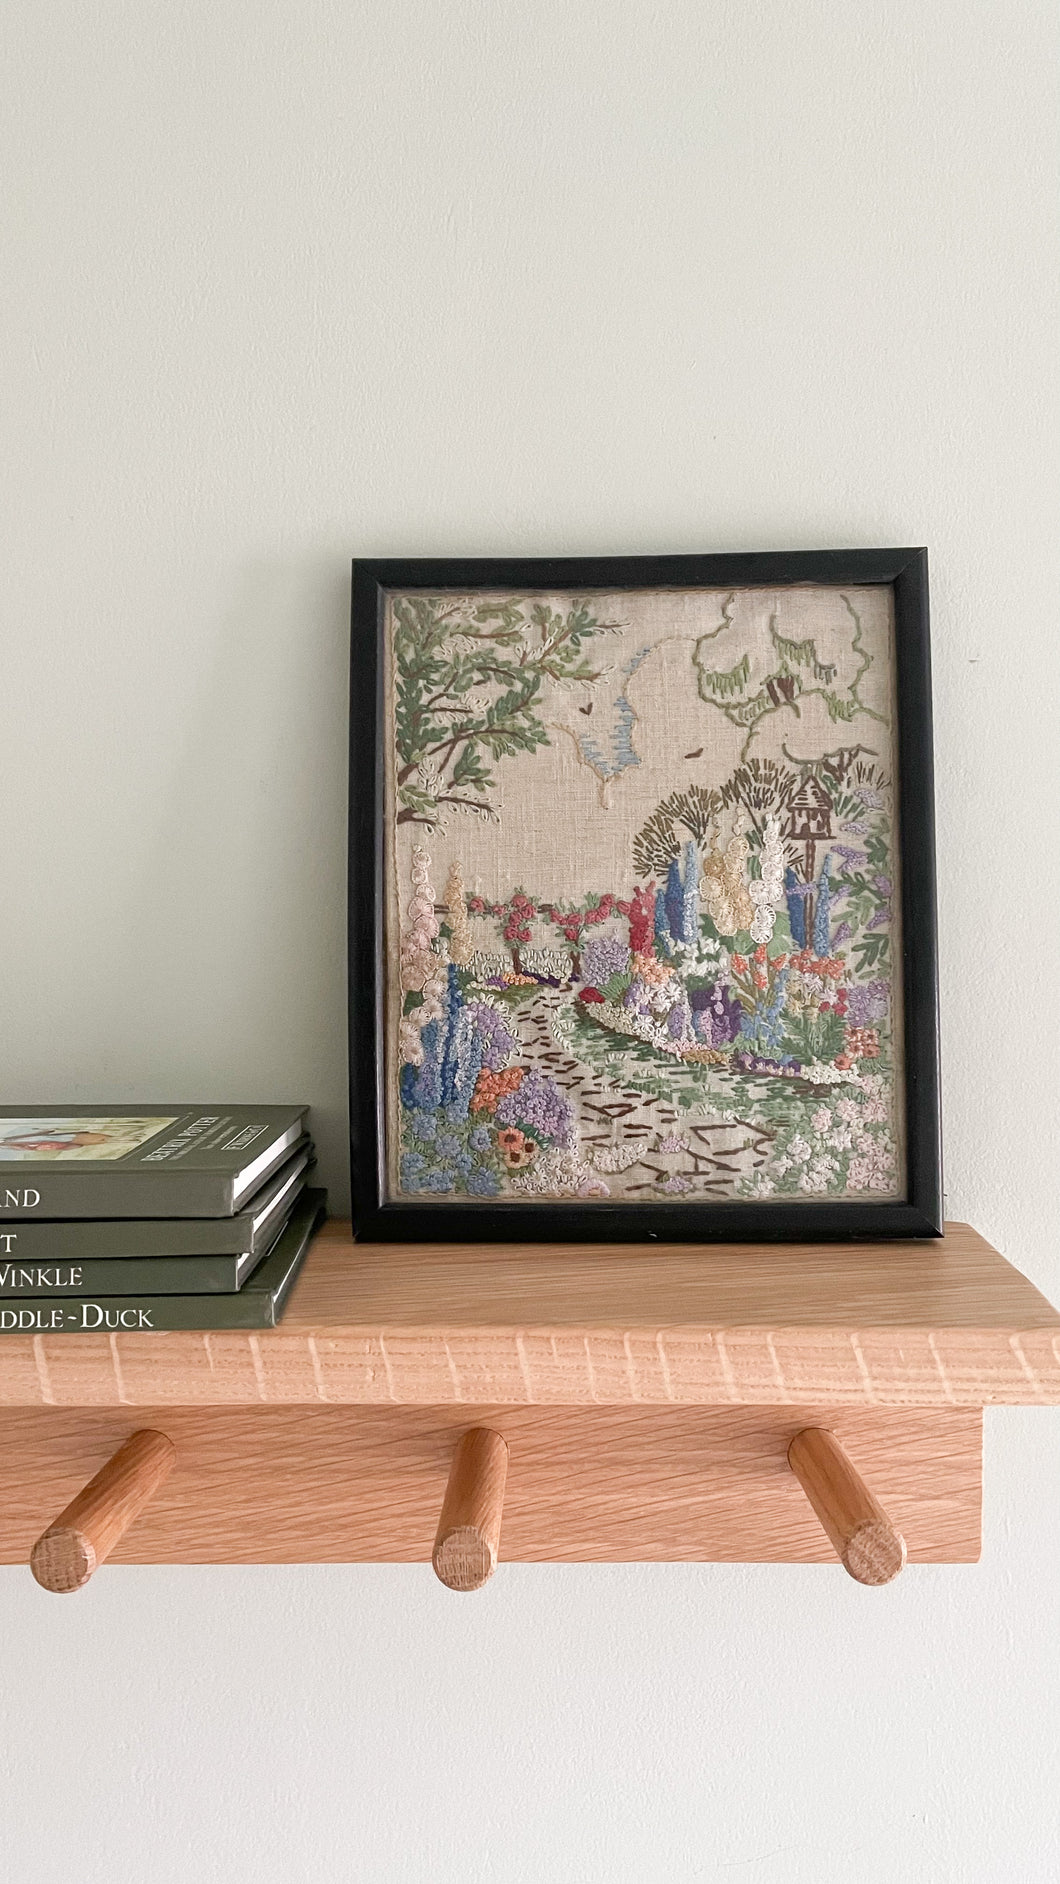 Vintage framed embroidery of a garden path and bird house / dove cote on a linen canvas - Moppet